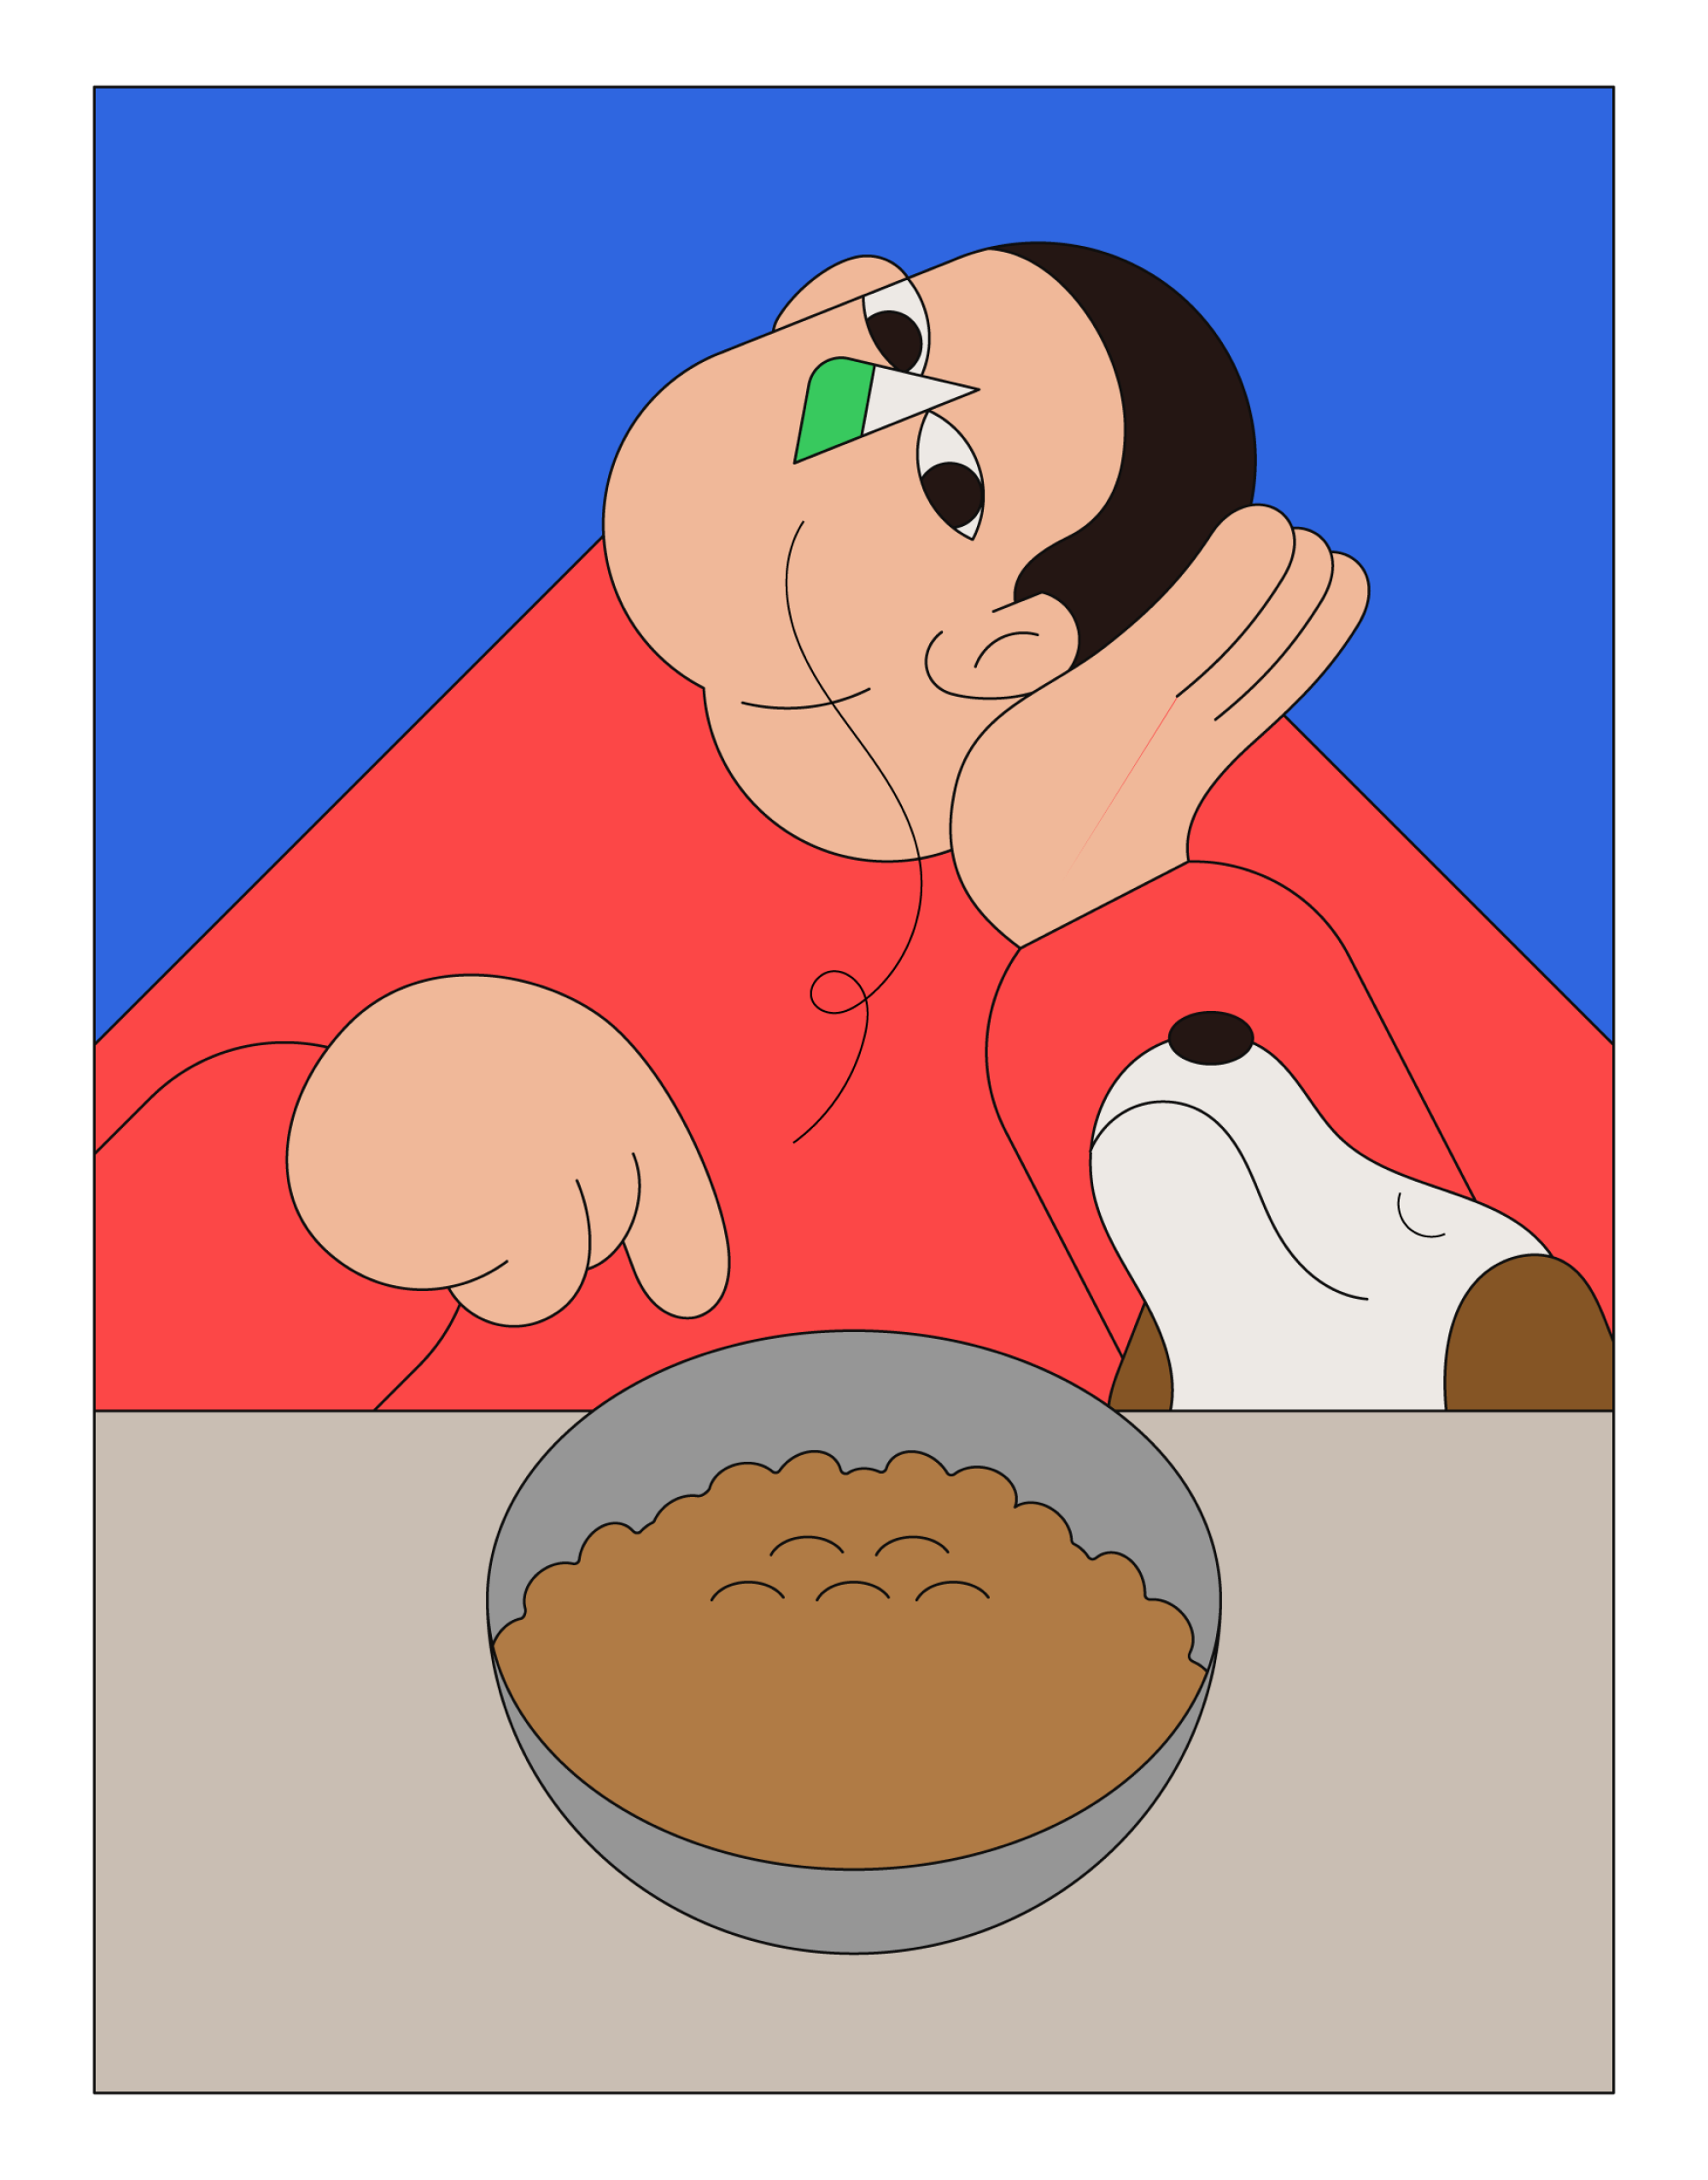 Illustration of a person with a green nose, and a dog next to them, pointing to a bowl of kibble, a line of scent wafts above